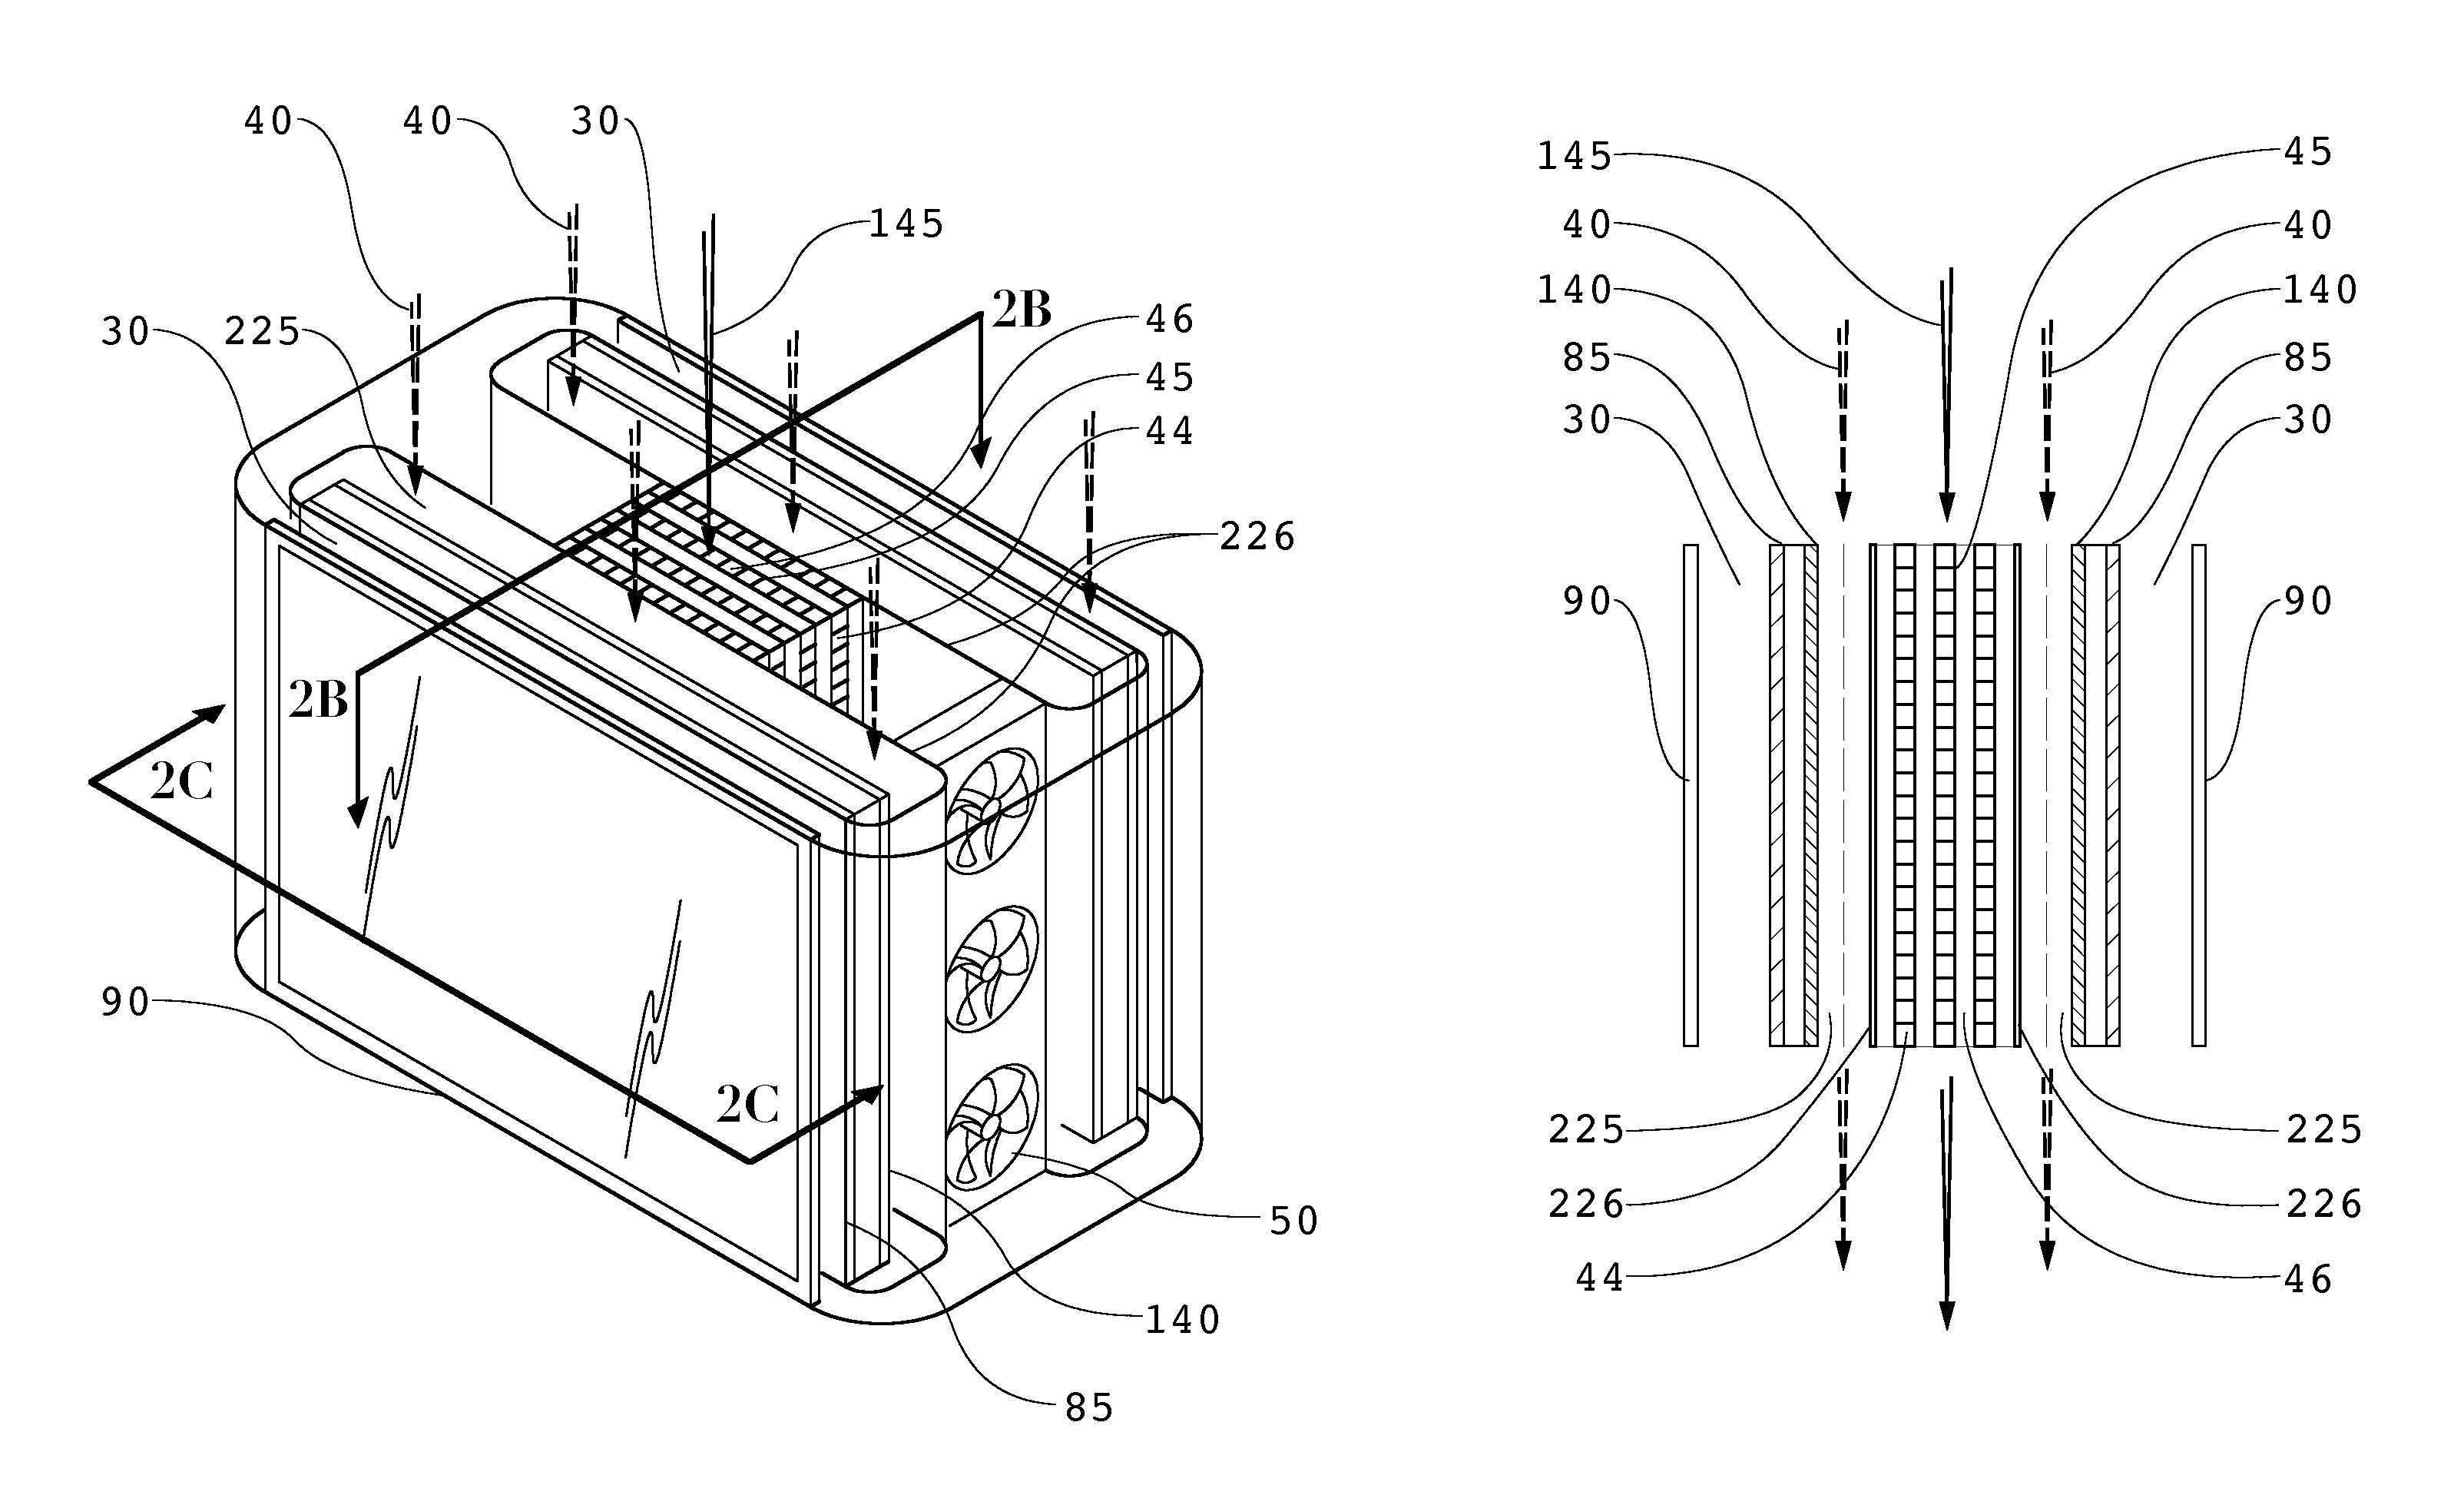 Heat exchanger for back to back electronic displays